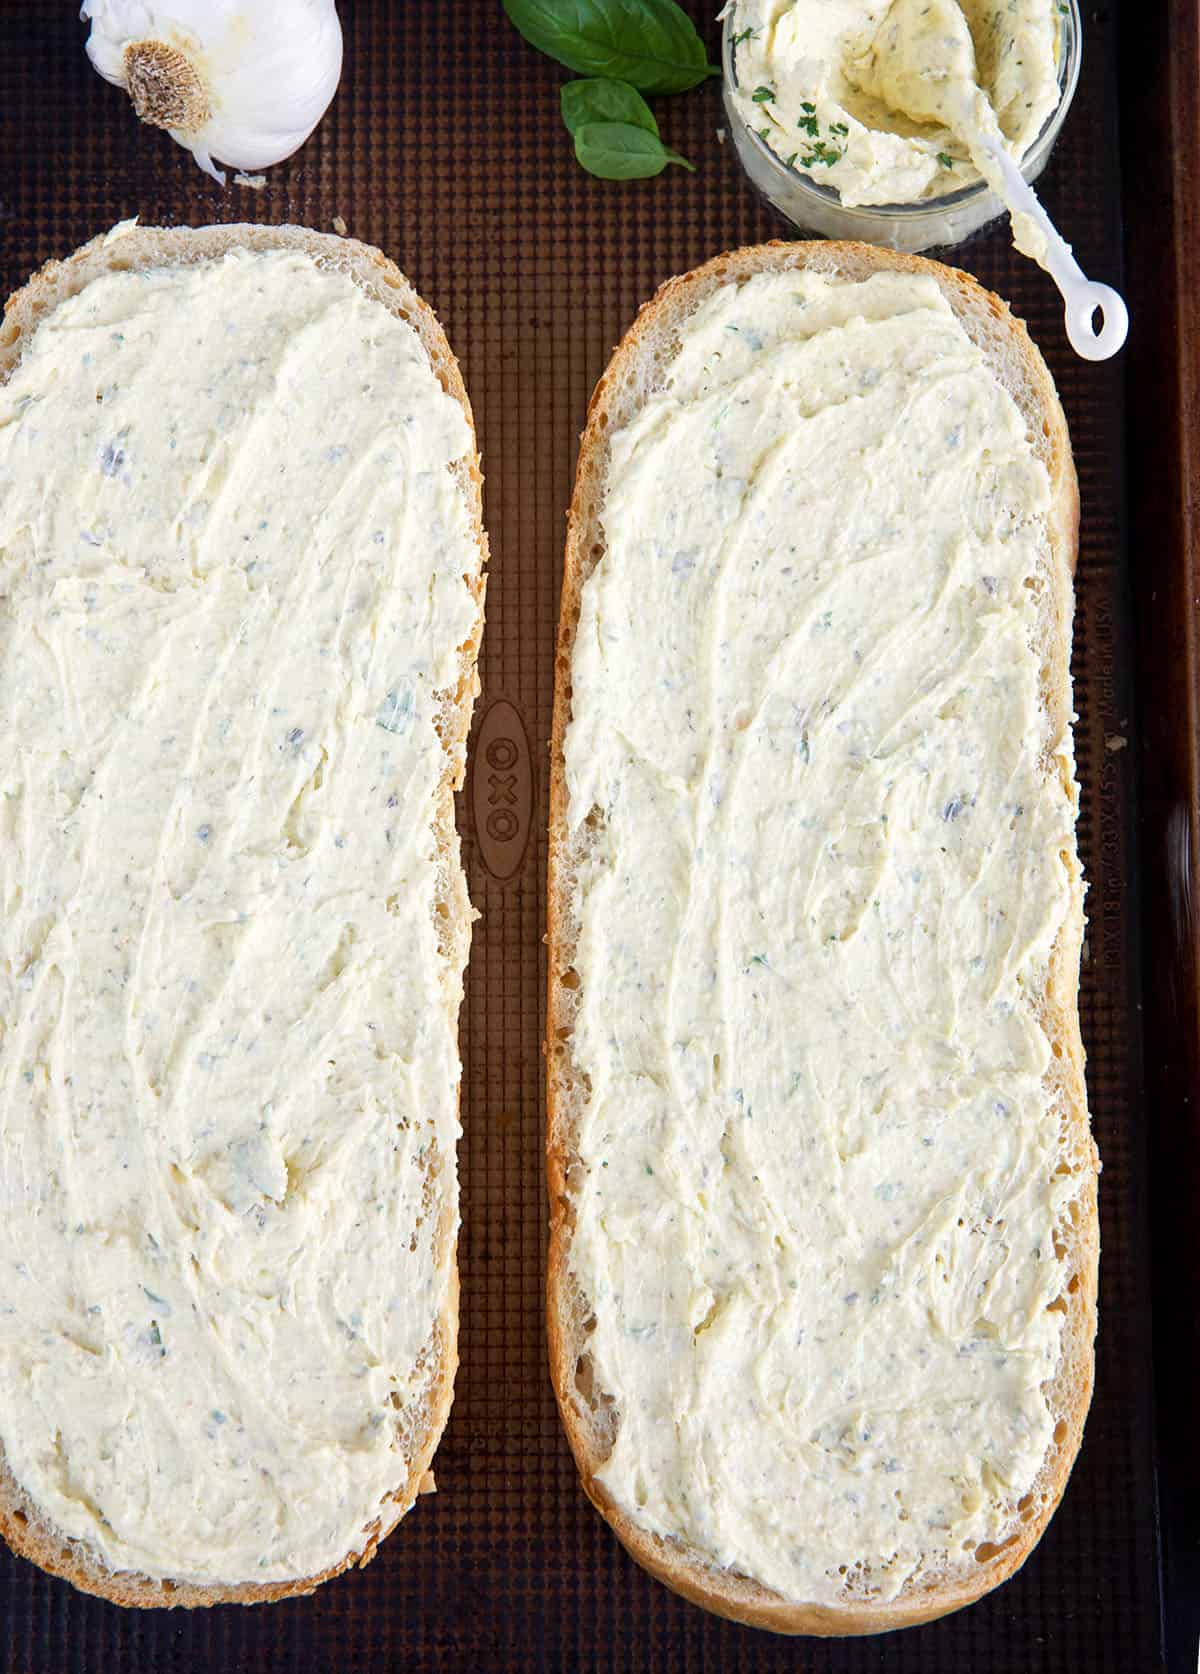 Two halves of a baguette are smeared with garlic butter spread. 